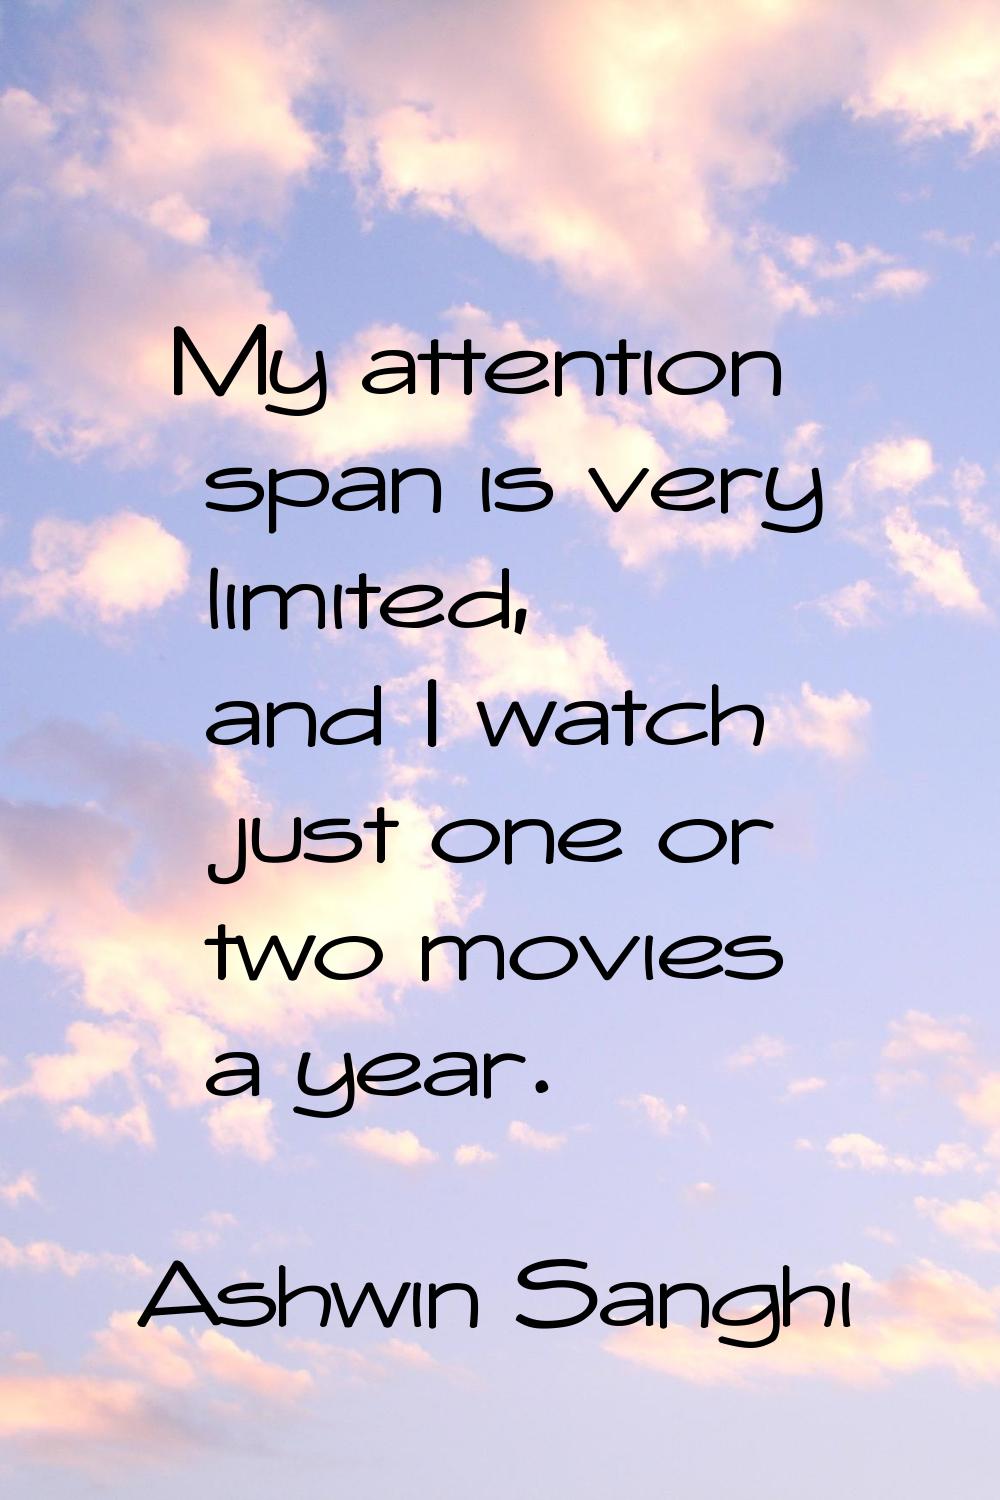 My attention span is very limited, and I watch just one or two movies a year.